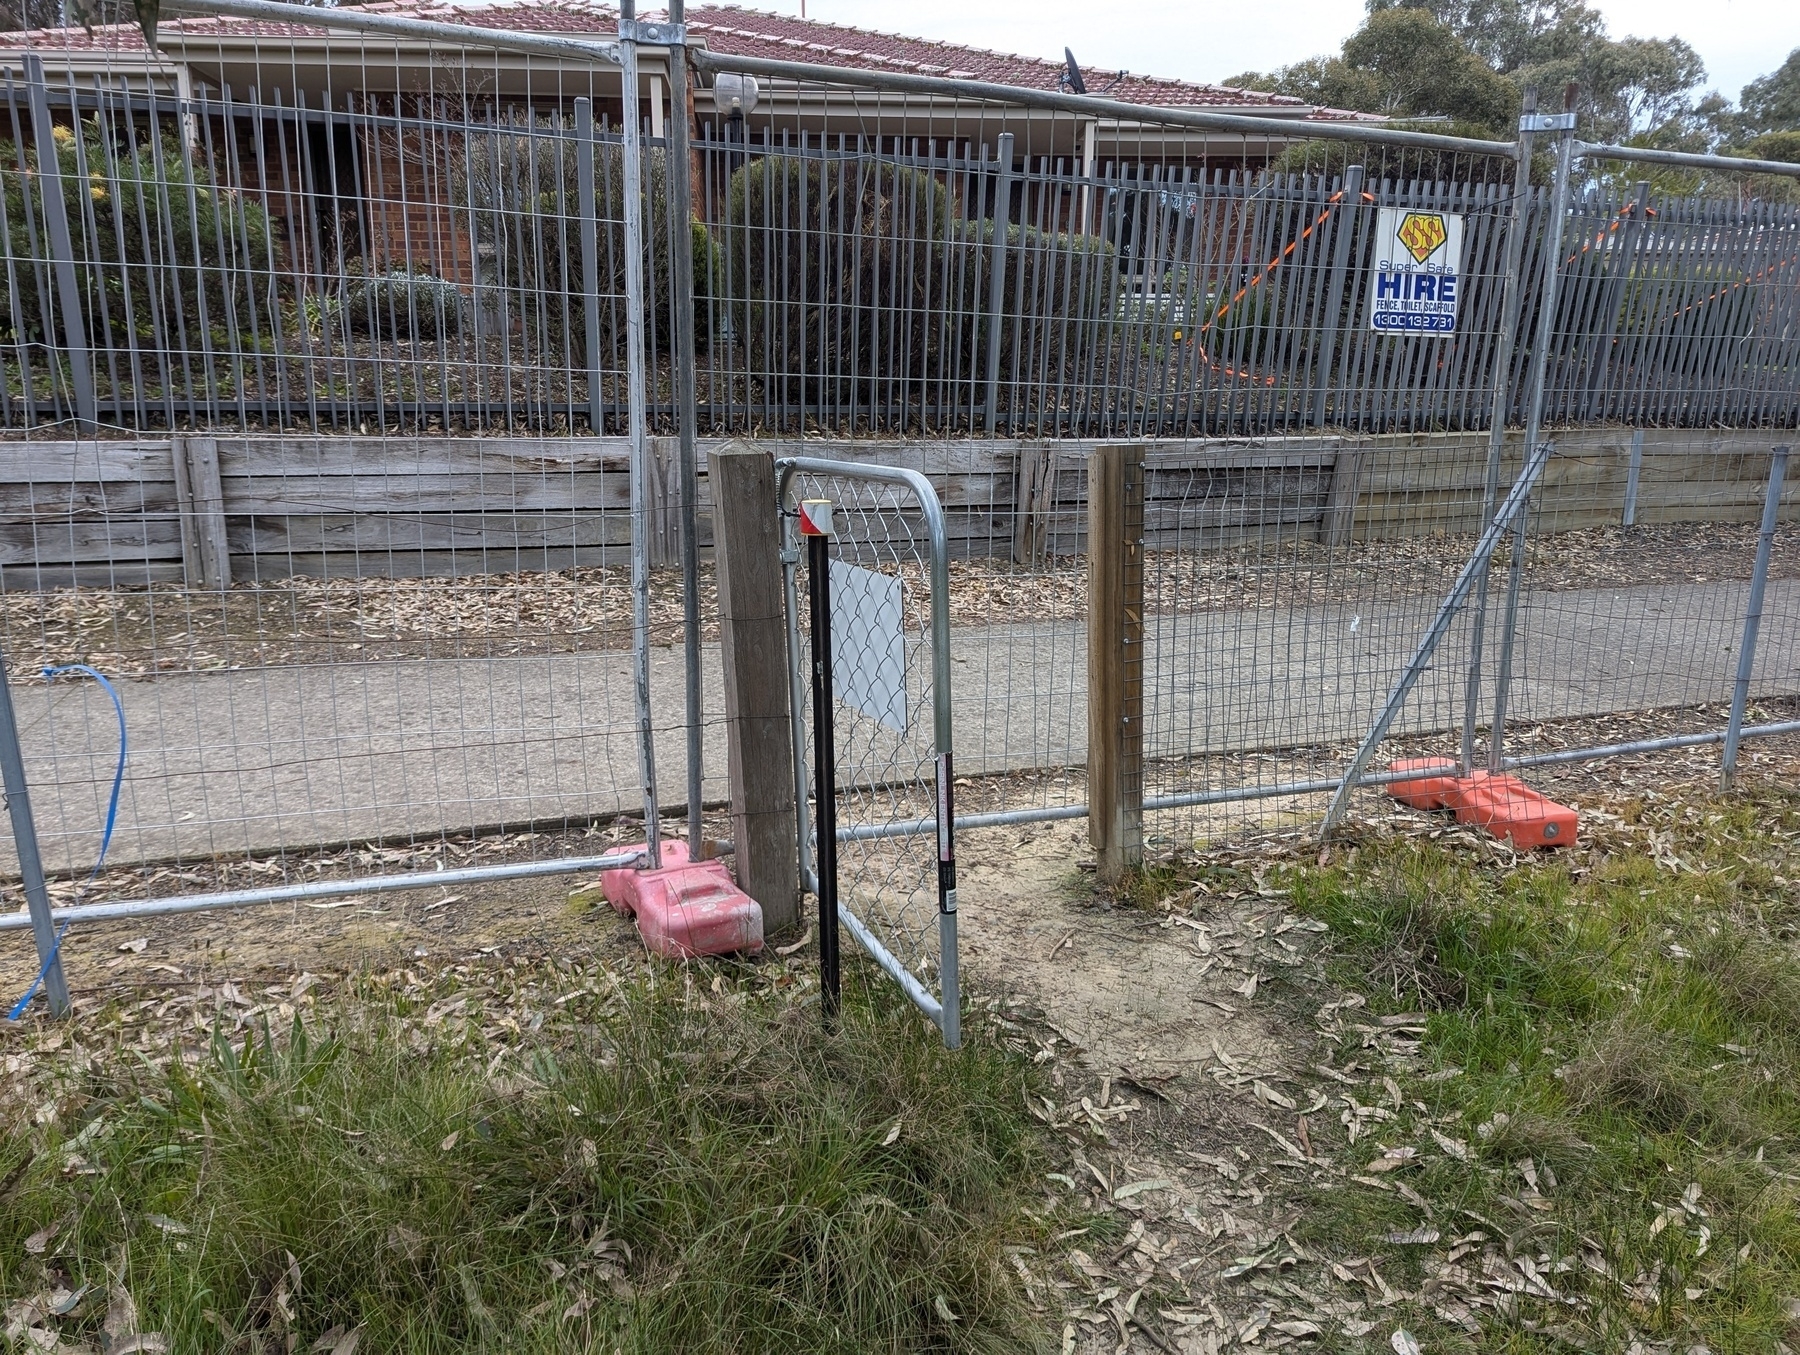 An open gate in front of a temporary fence blocking access to a path.